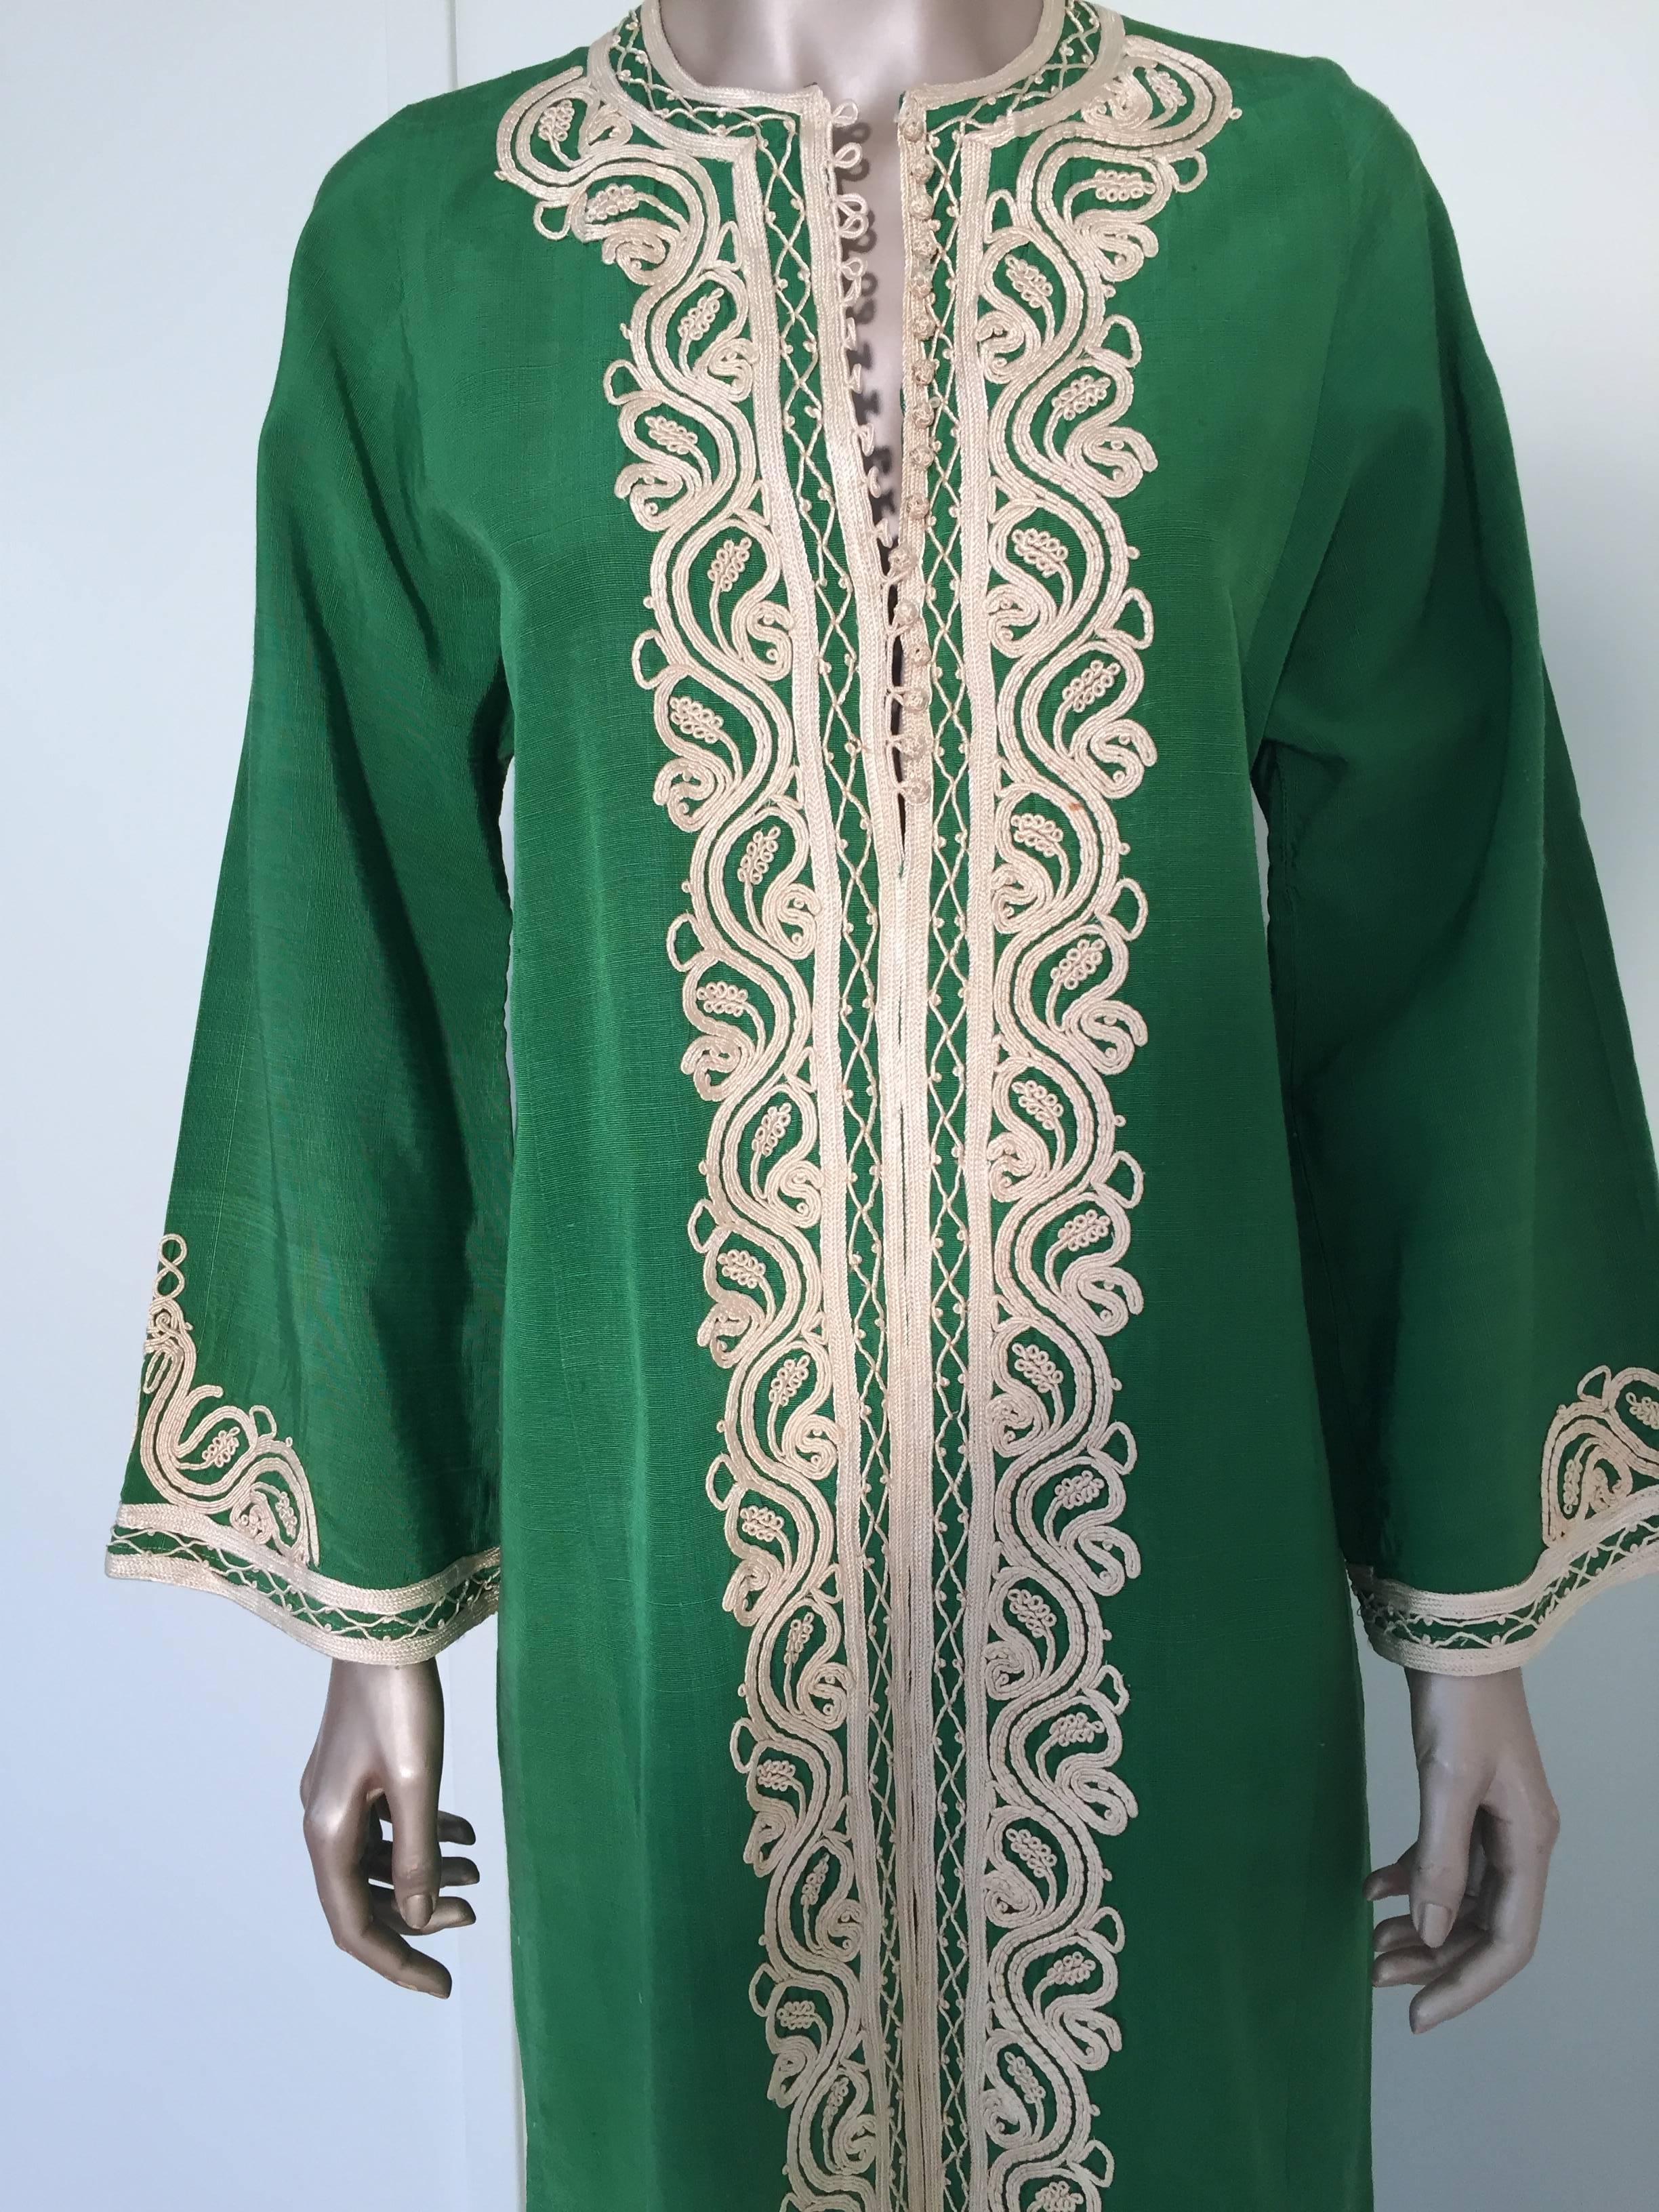 Elegant Moroccan caftan emerald green silk embroidered with white threads,
circa 1970s.
This long maxi dress kaftan is embroidered and embellished entirely by hand.
One of a kind evening Moroccan Middle Eastern gown.
The kaftan features a